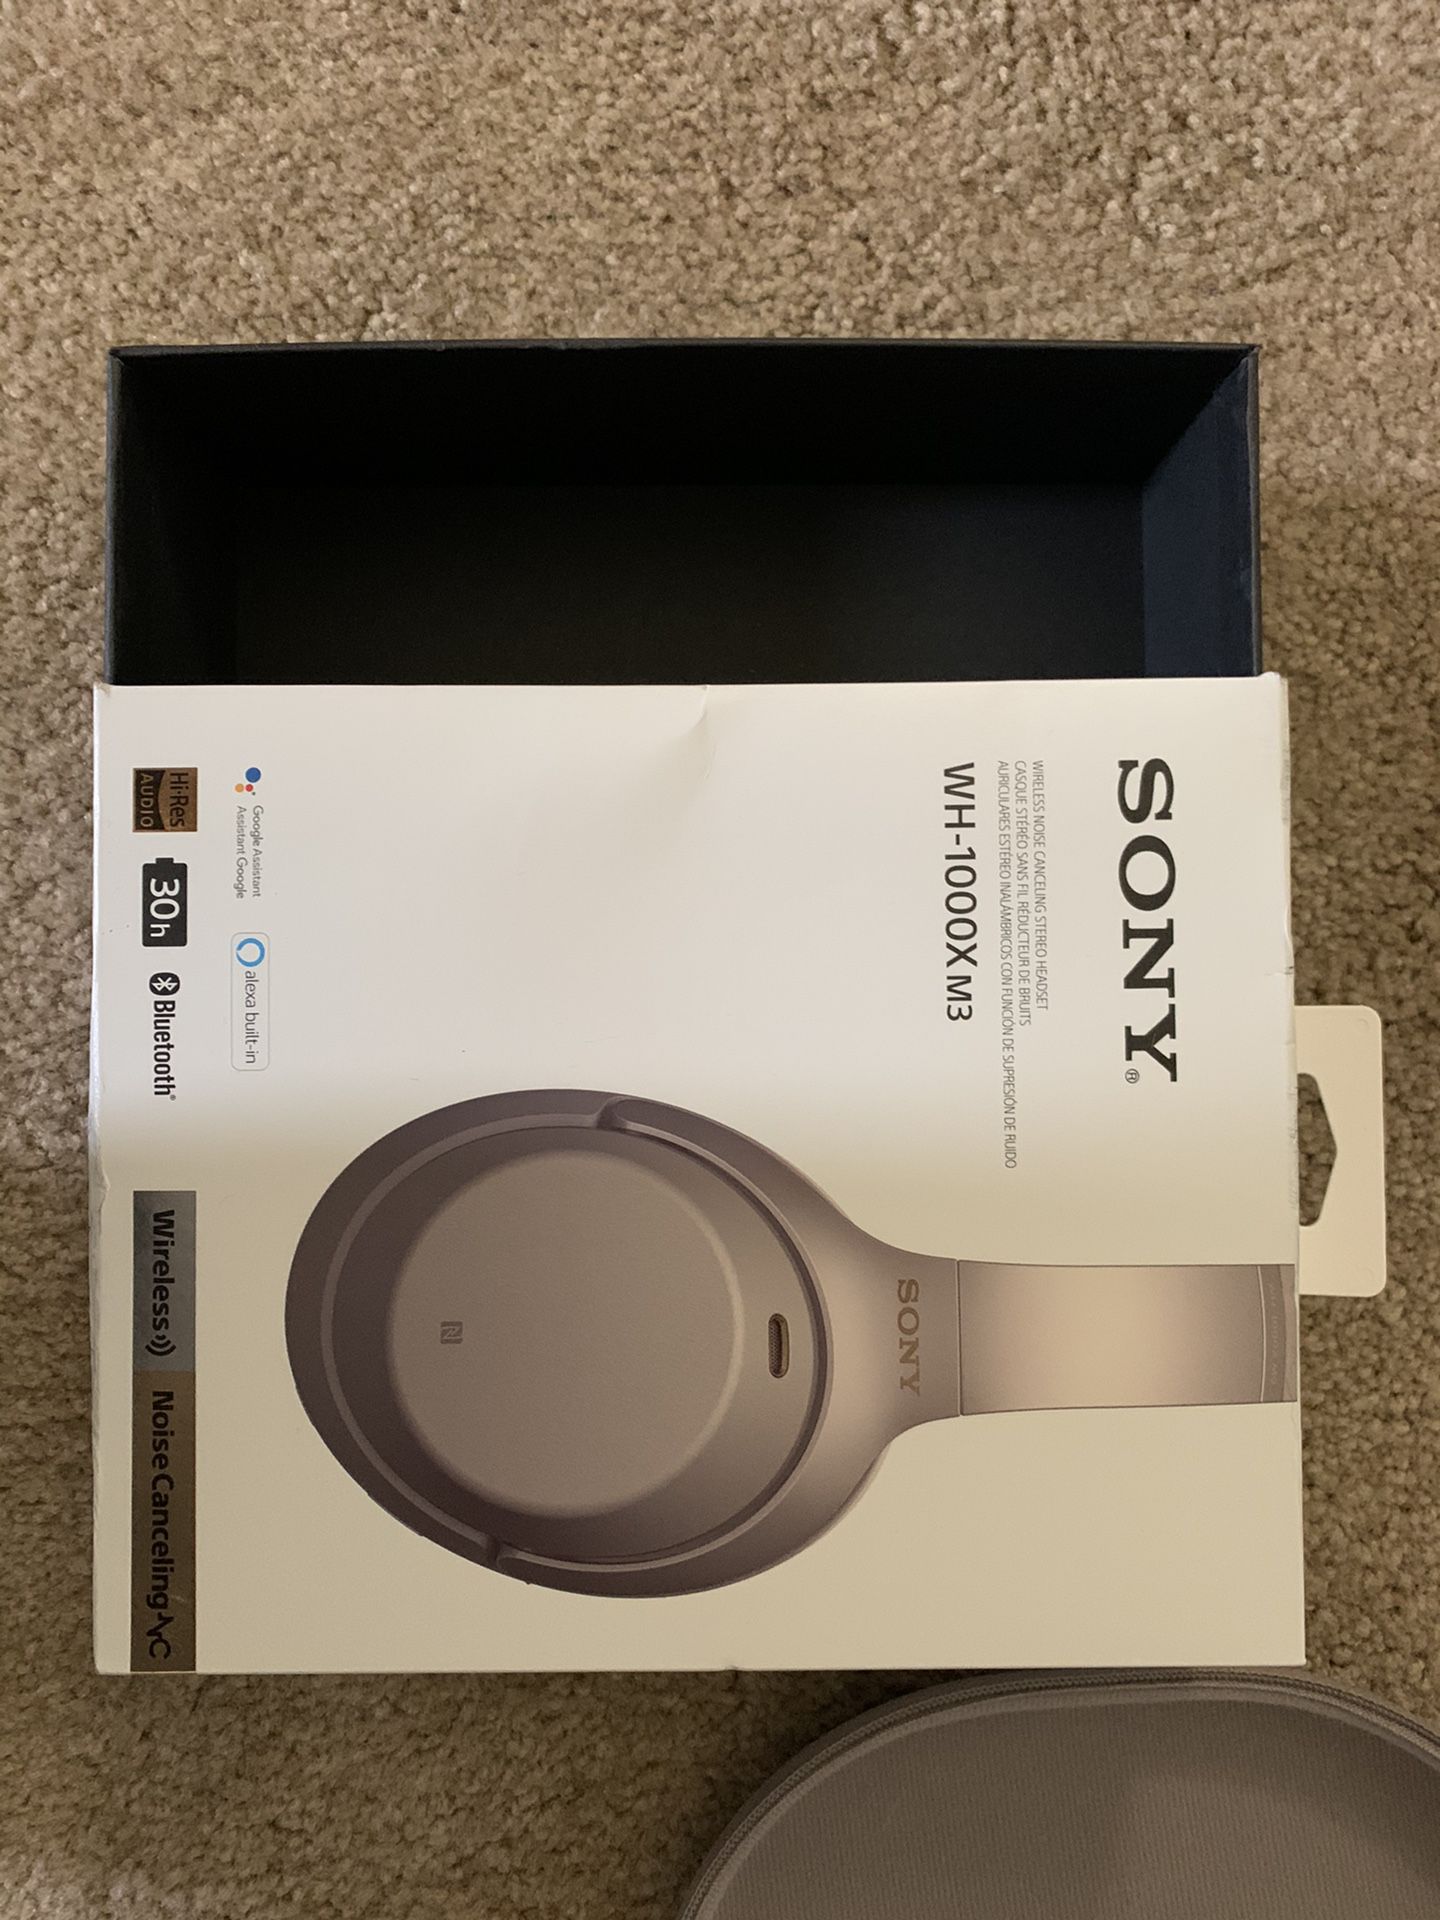 SONY WH-1000XM3 over-ear noise cancelling headphones